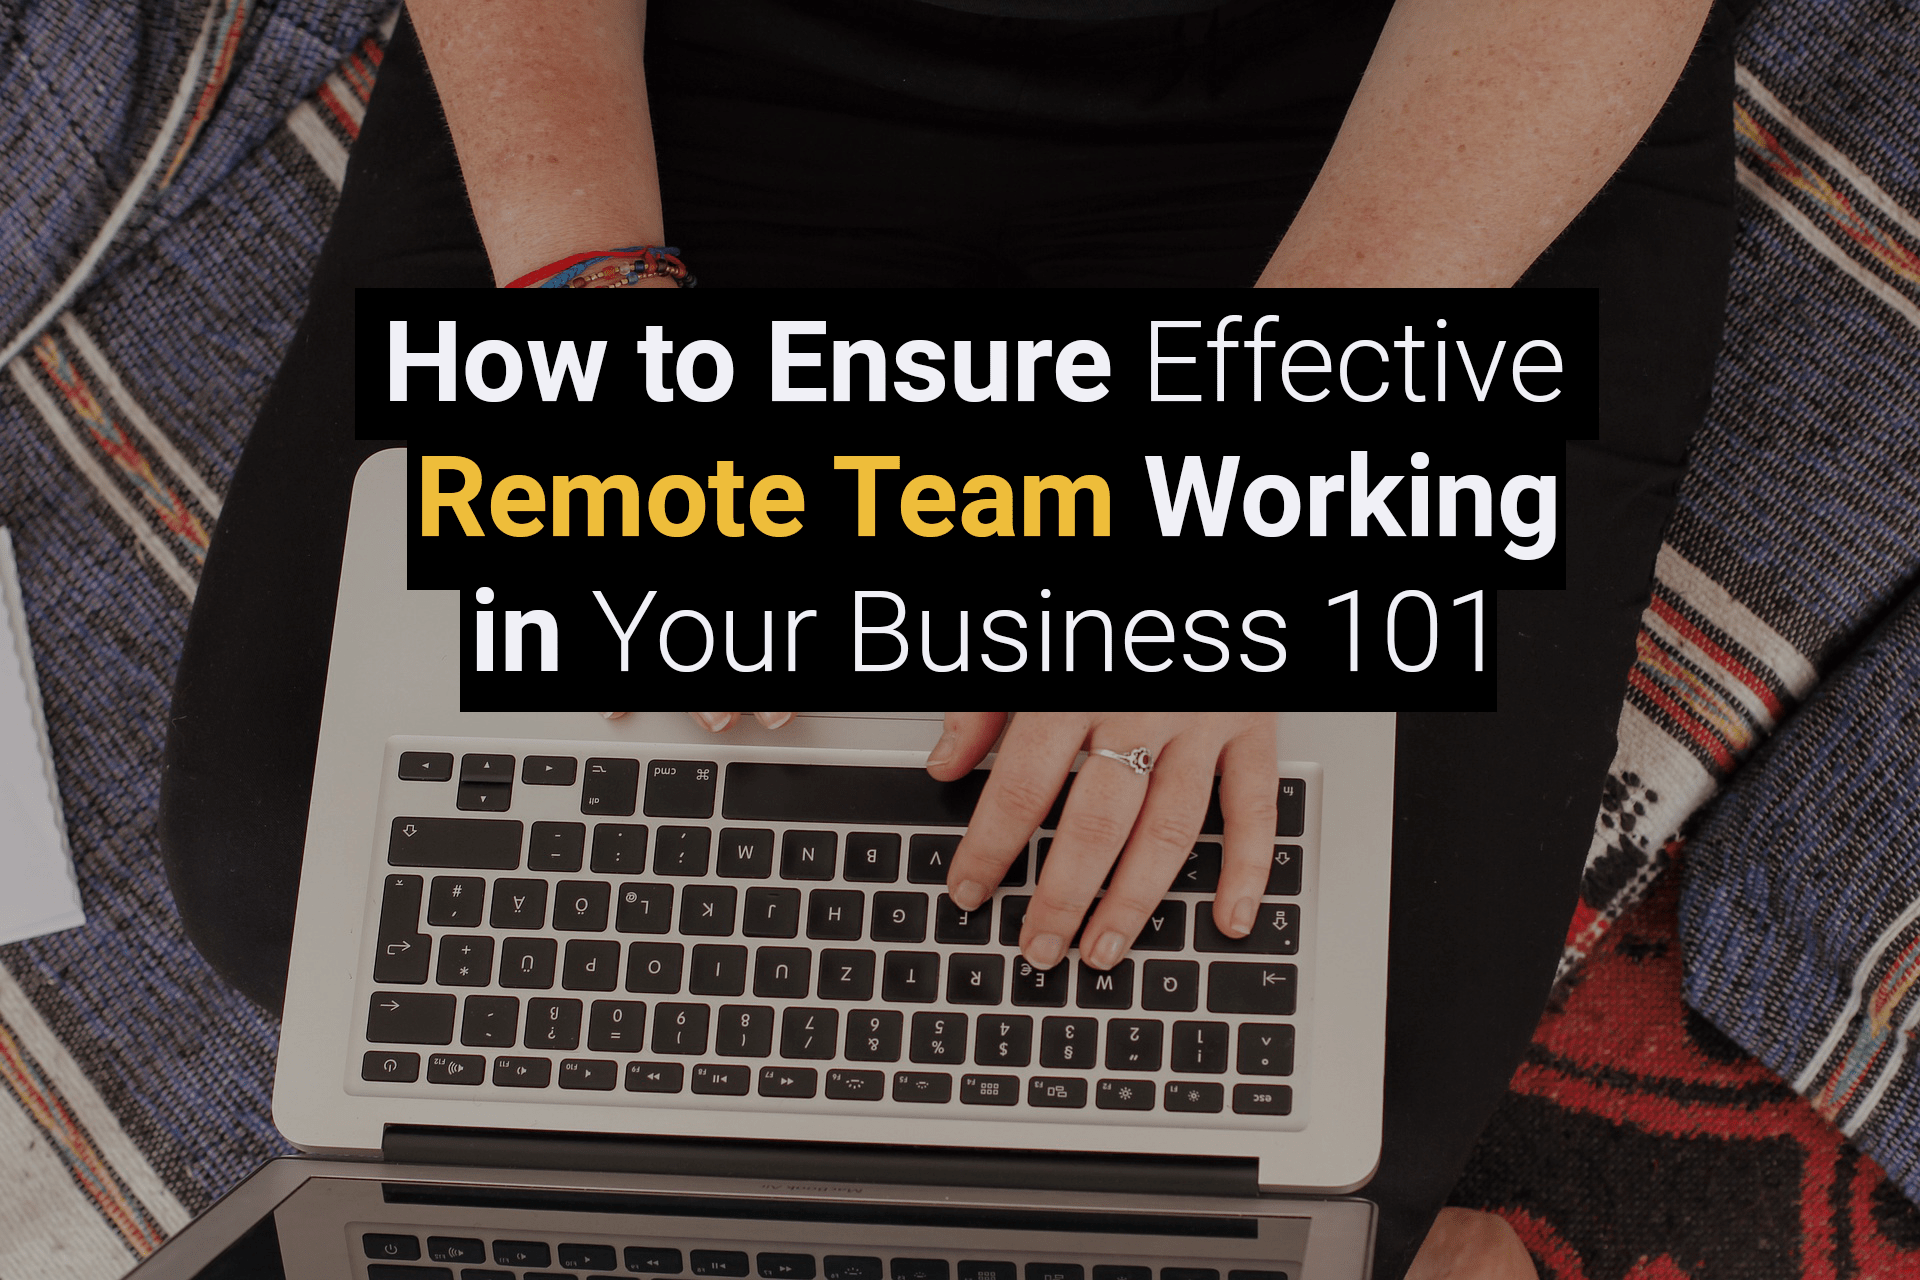 How to Ensure Effective Remote Team Working in Your Business